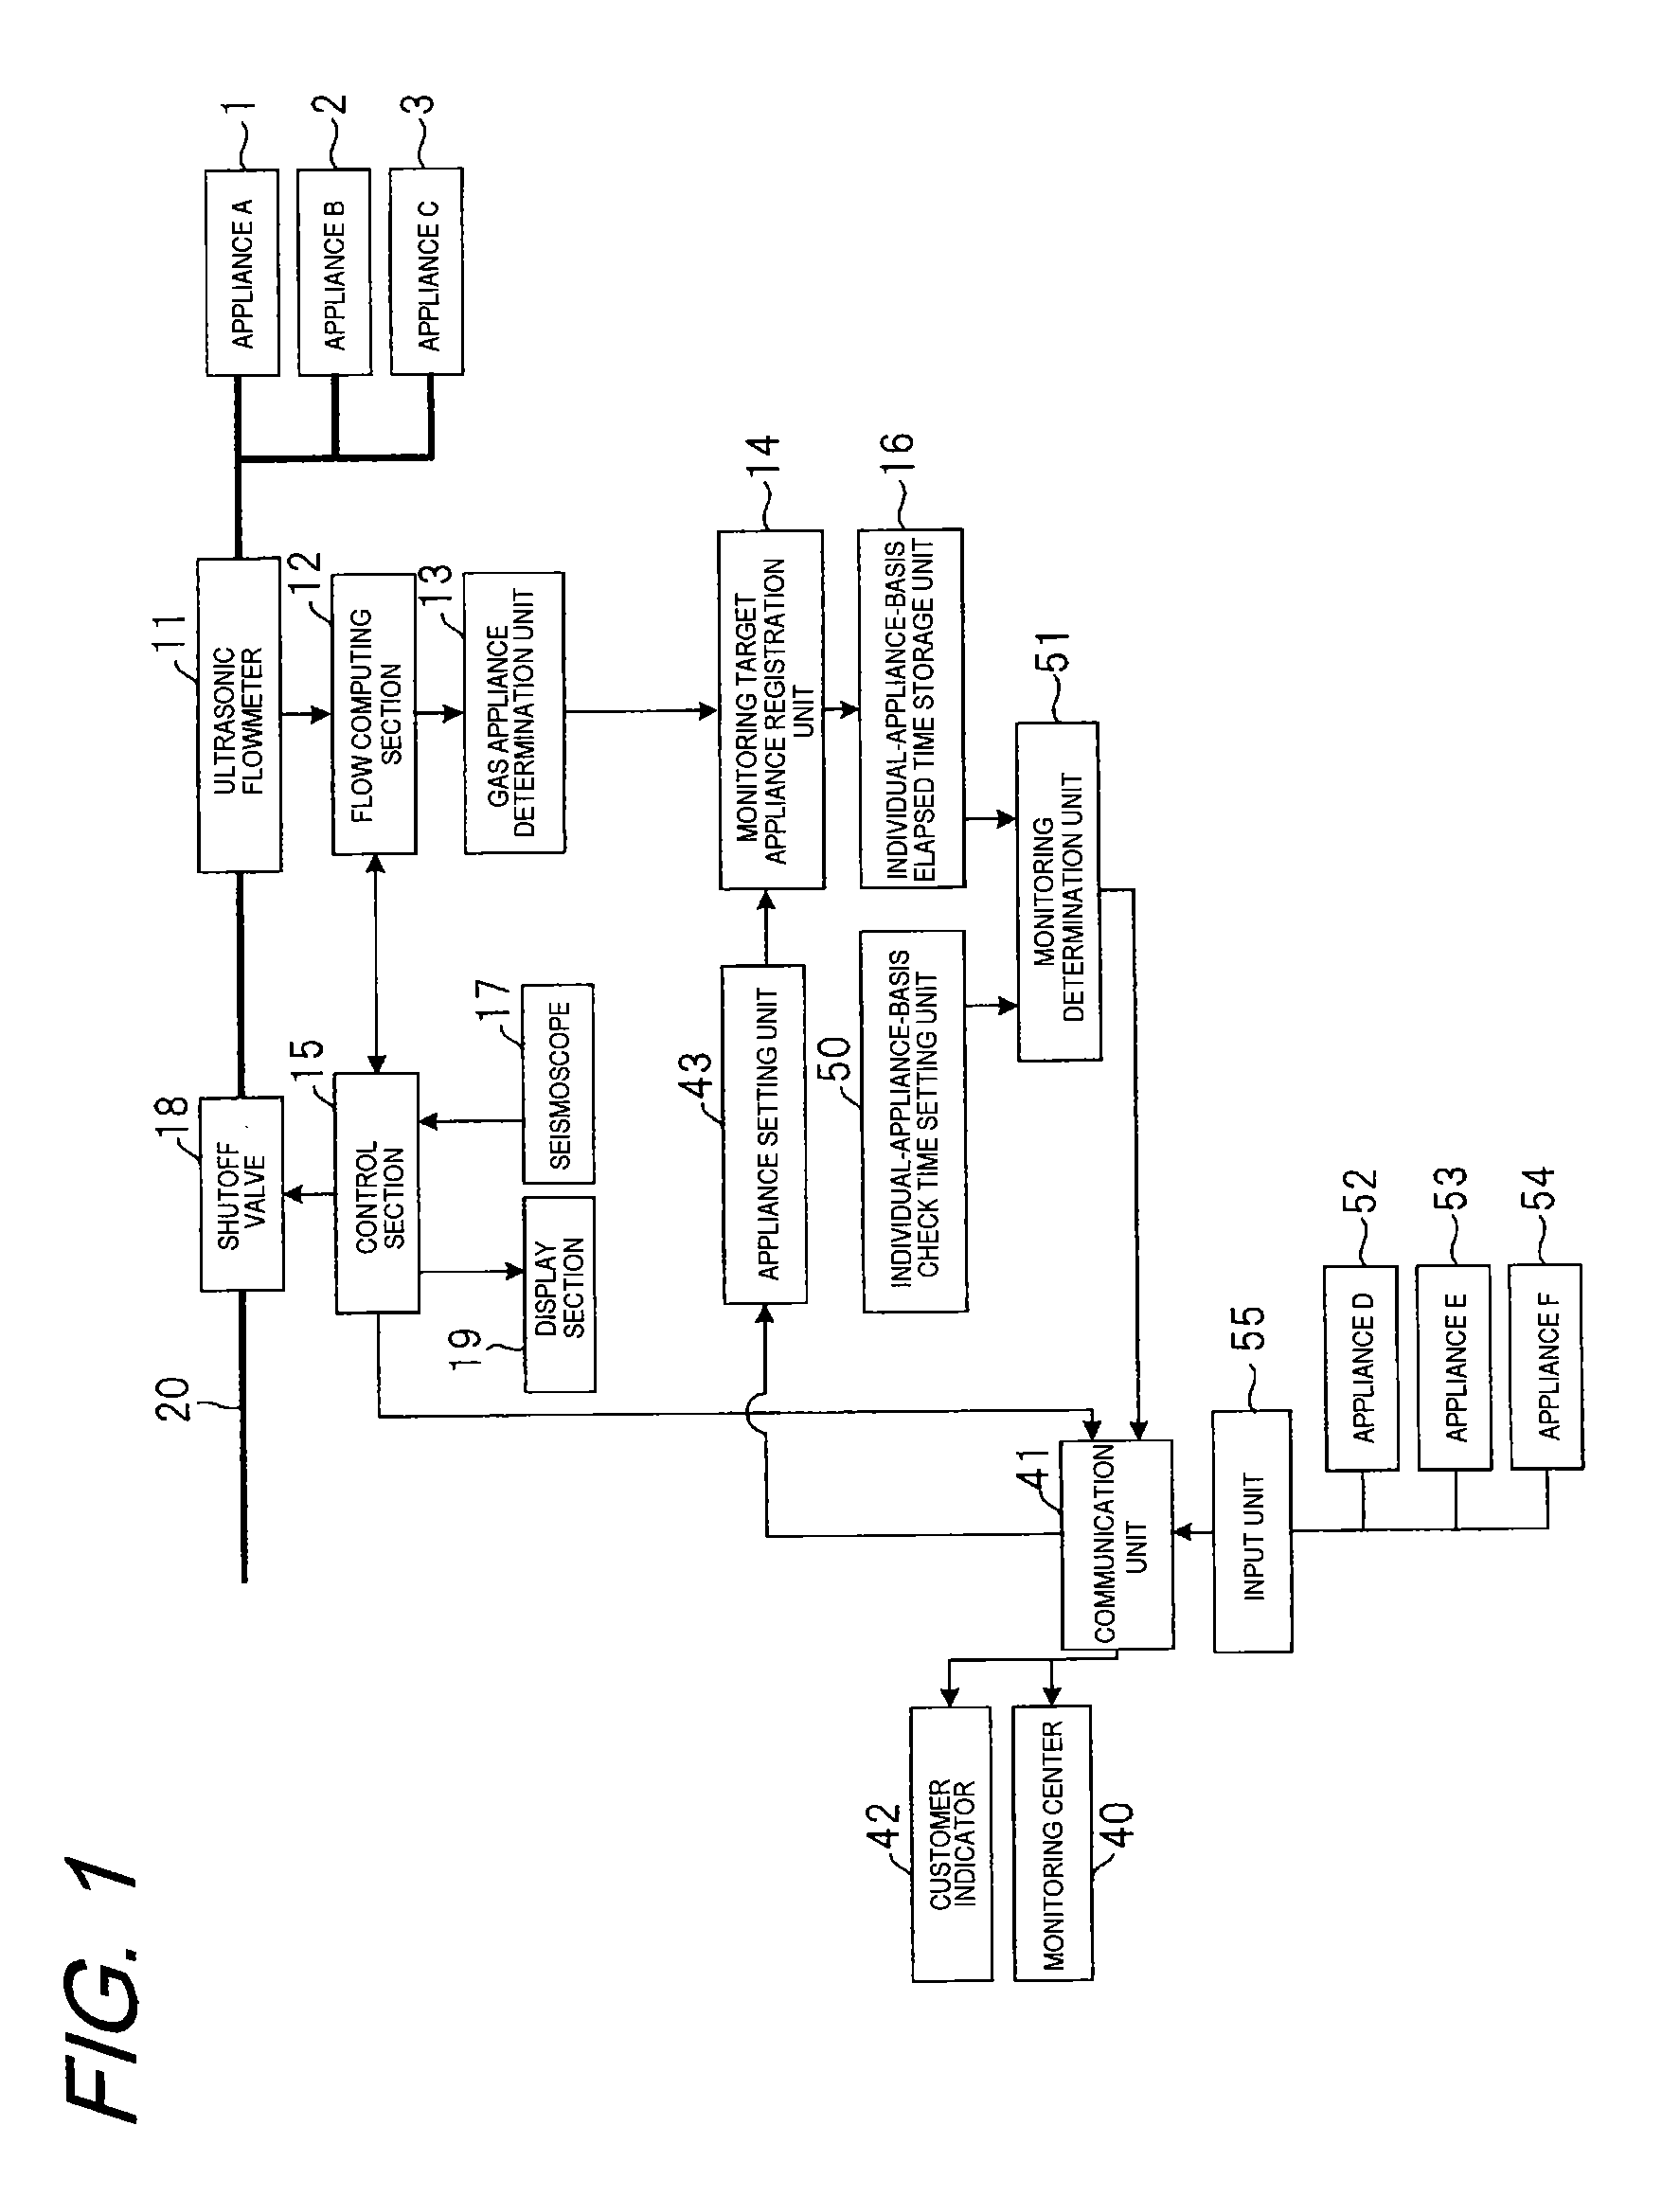 Appliance management system and gas supply system